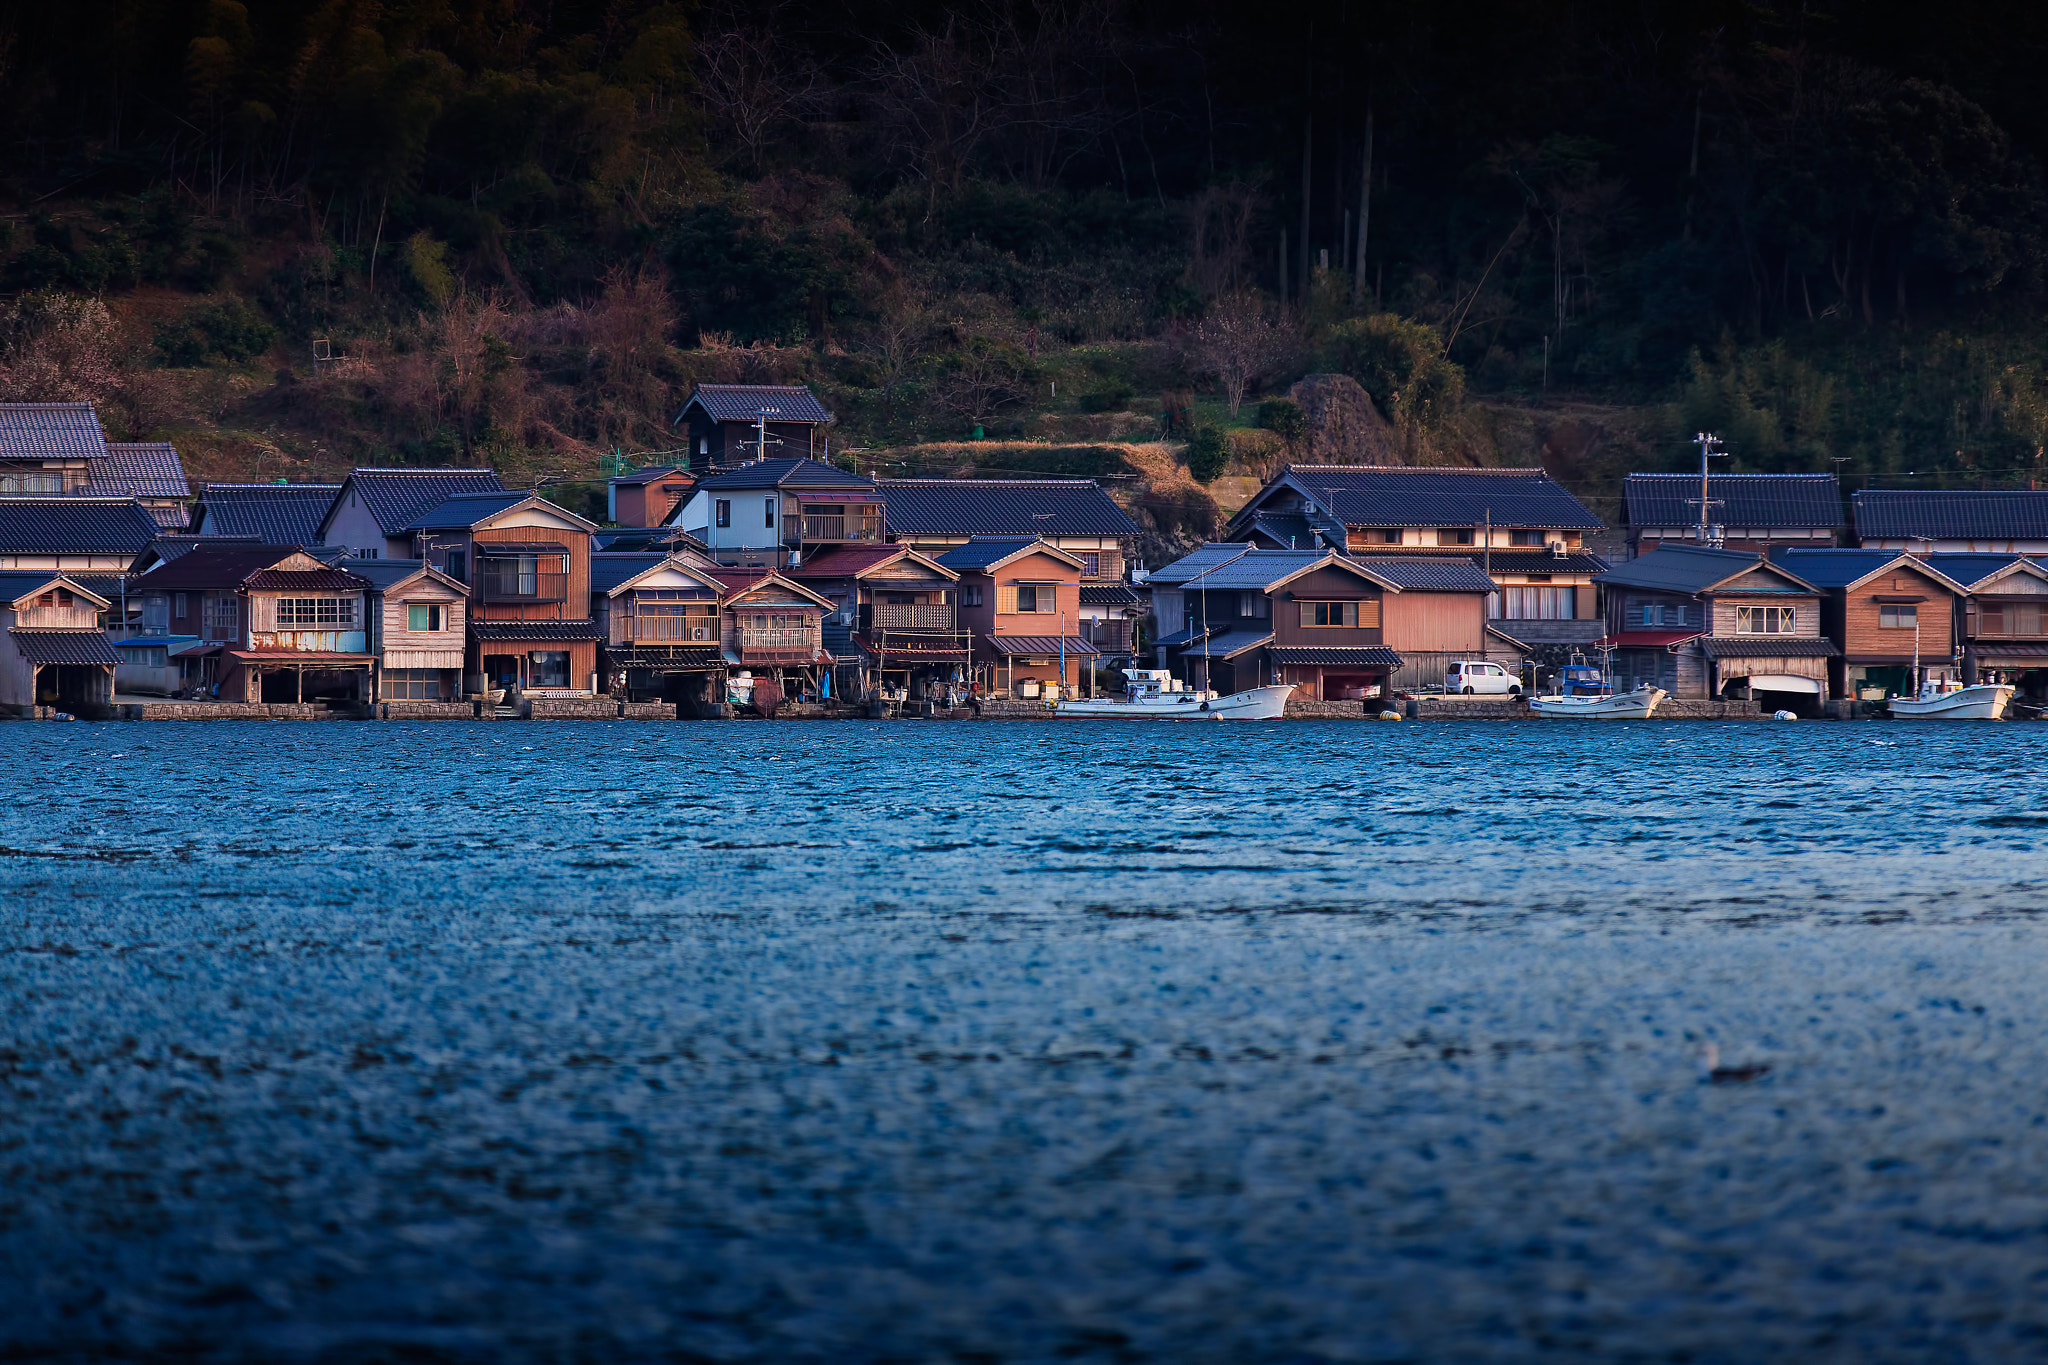 A Fishing Harbor in KYOTO